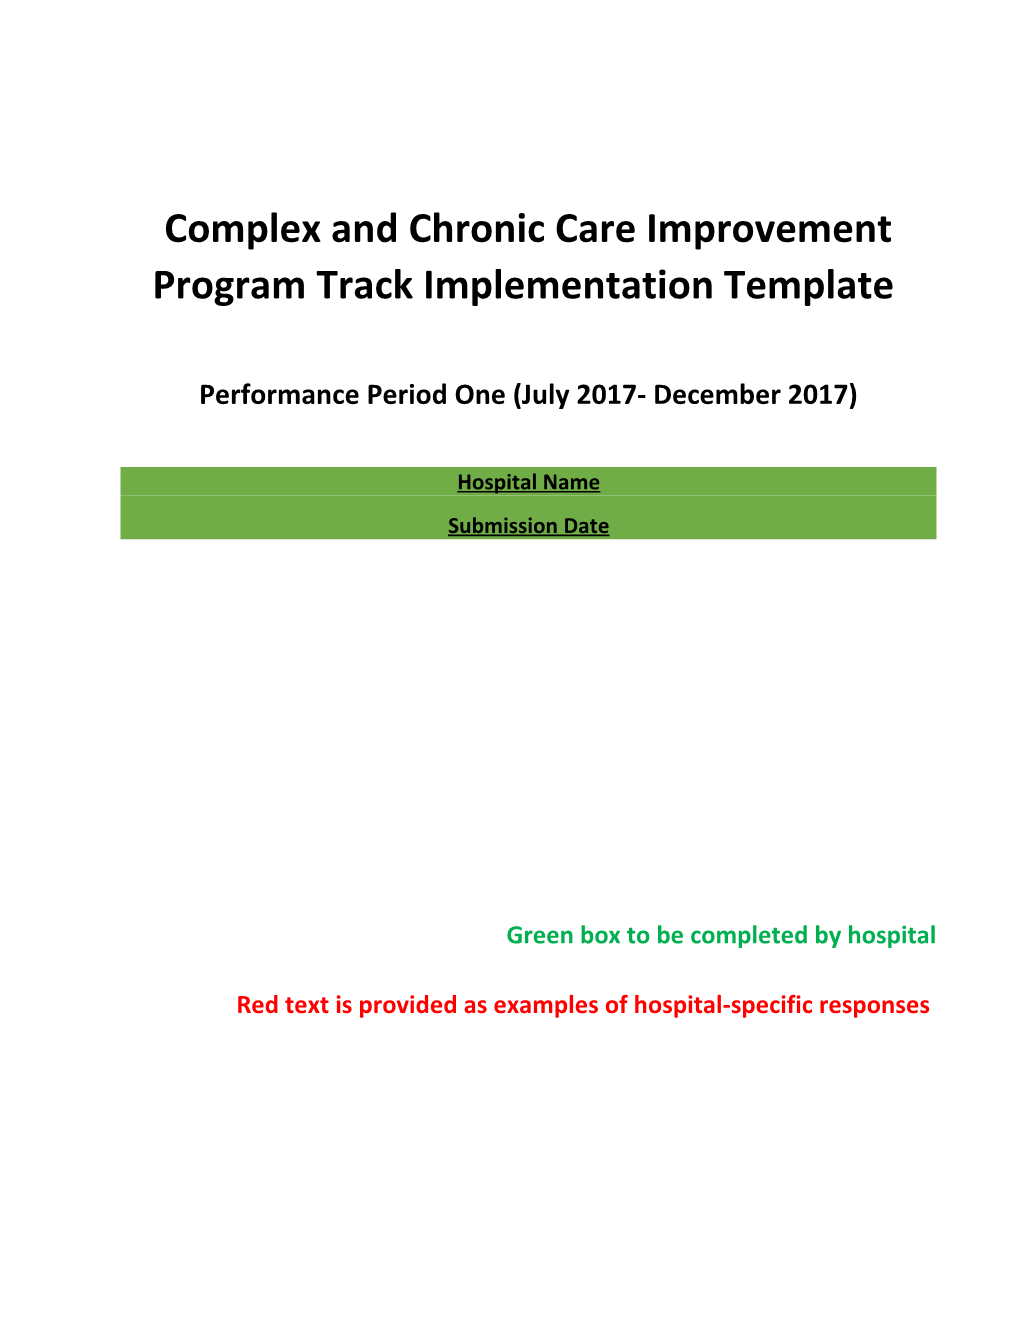 Complex and Chronic Care Improvement Program Track Implementation Template